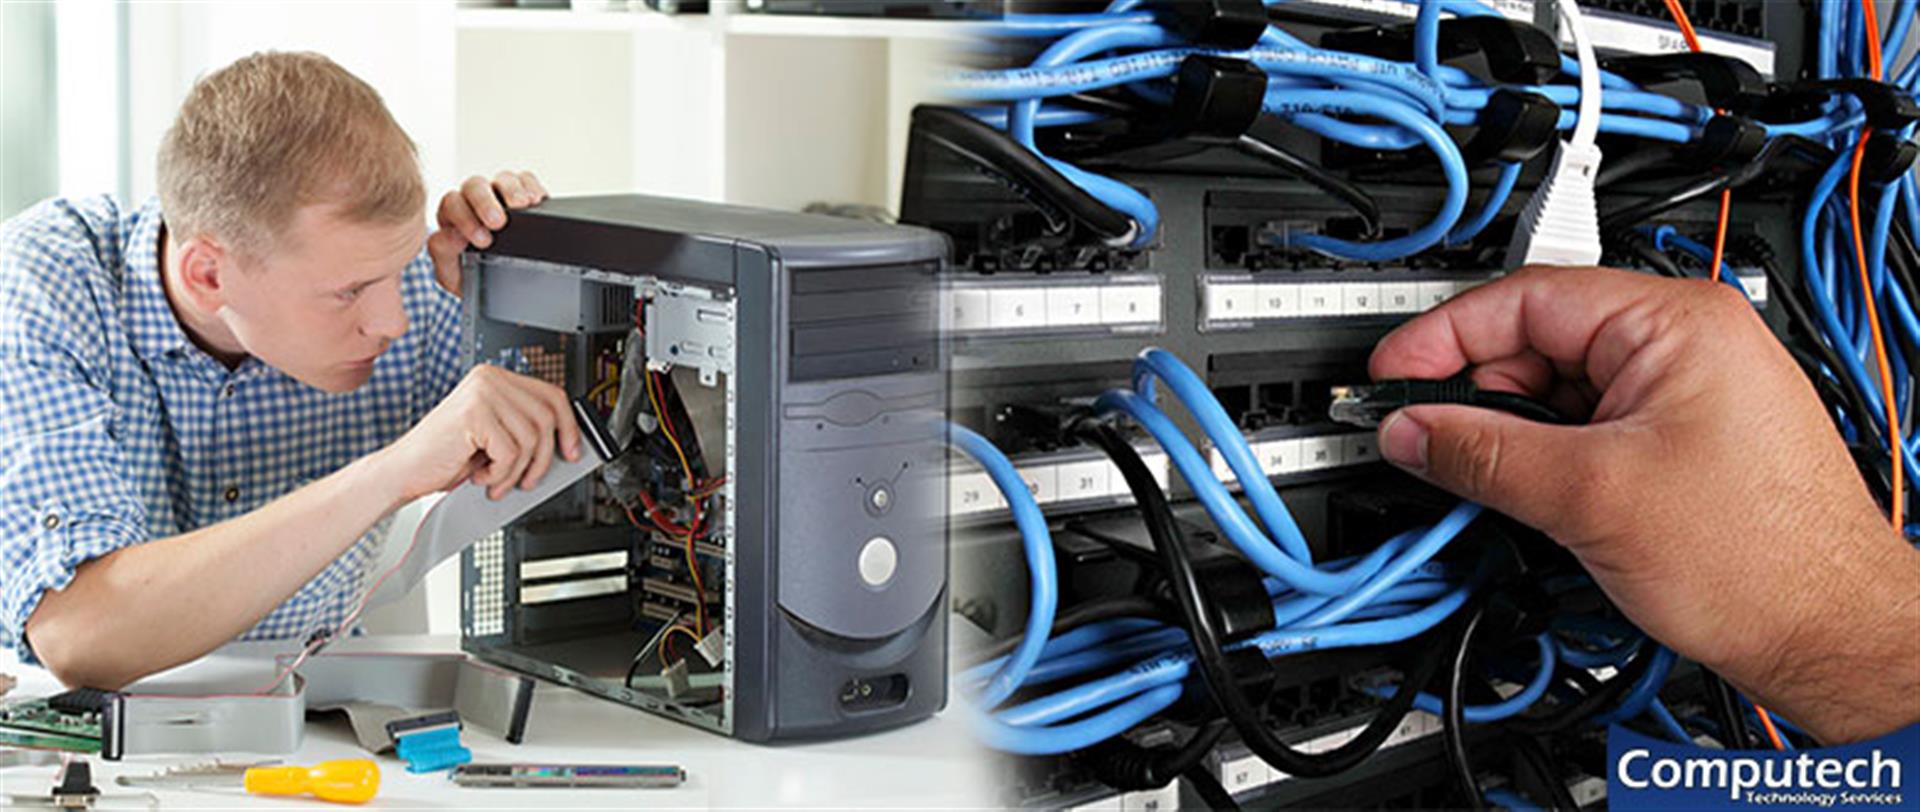 Eloy Arizona Onsite Computer & Printer Repairs, Networking, Voice and High Speed Data Wiring Services